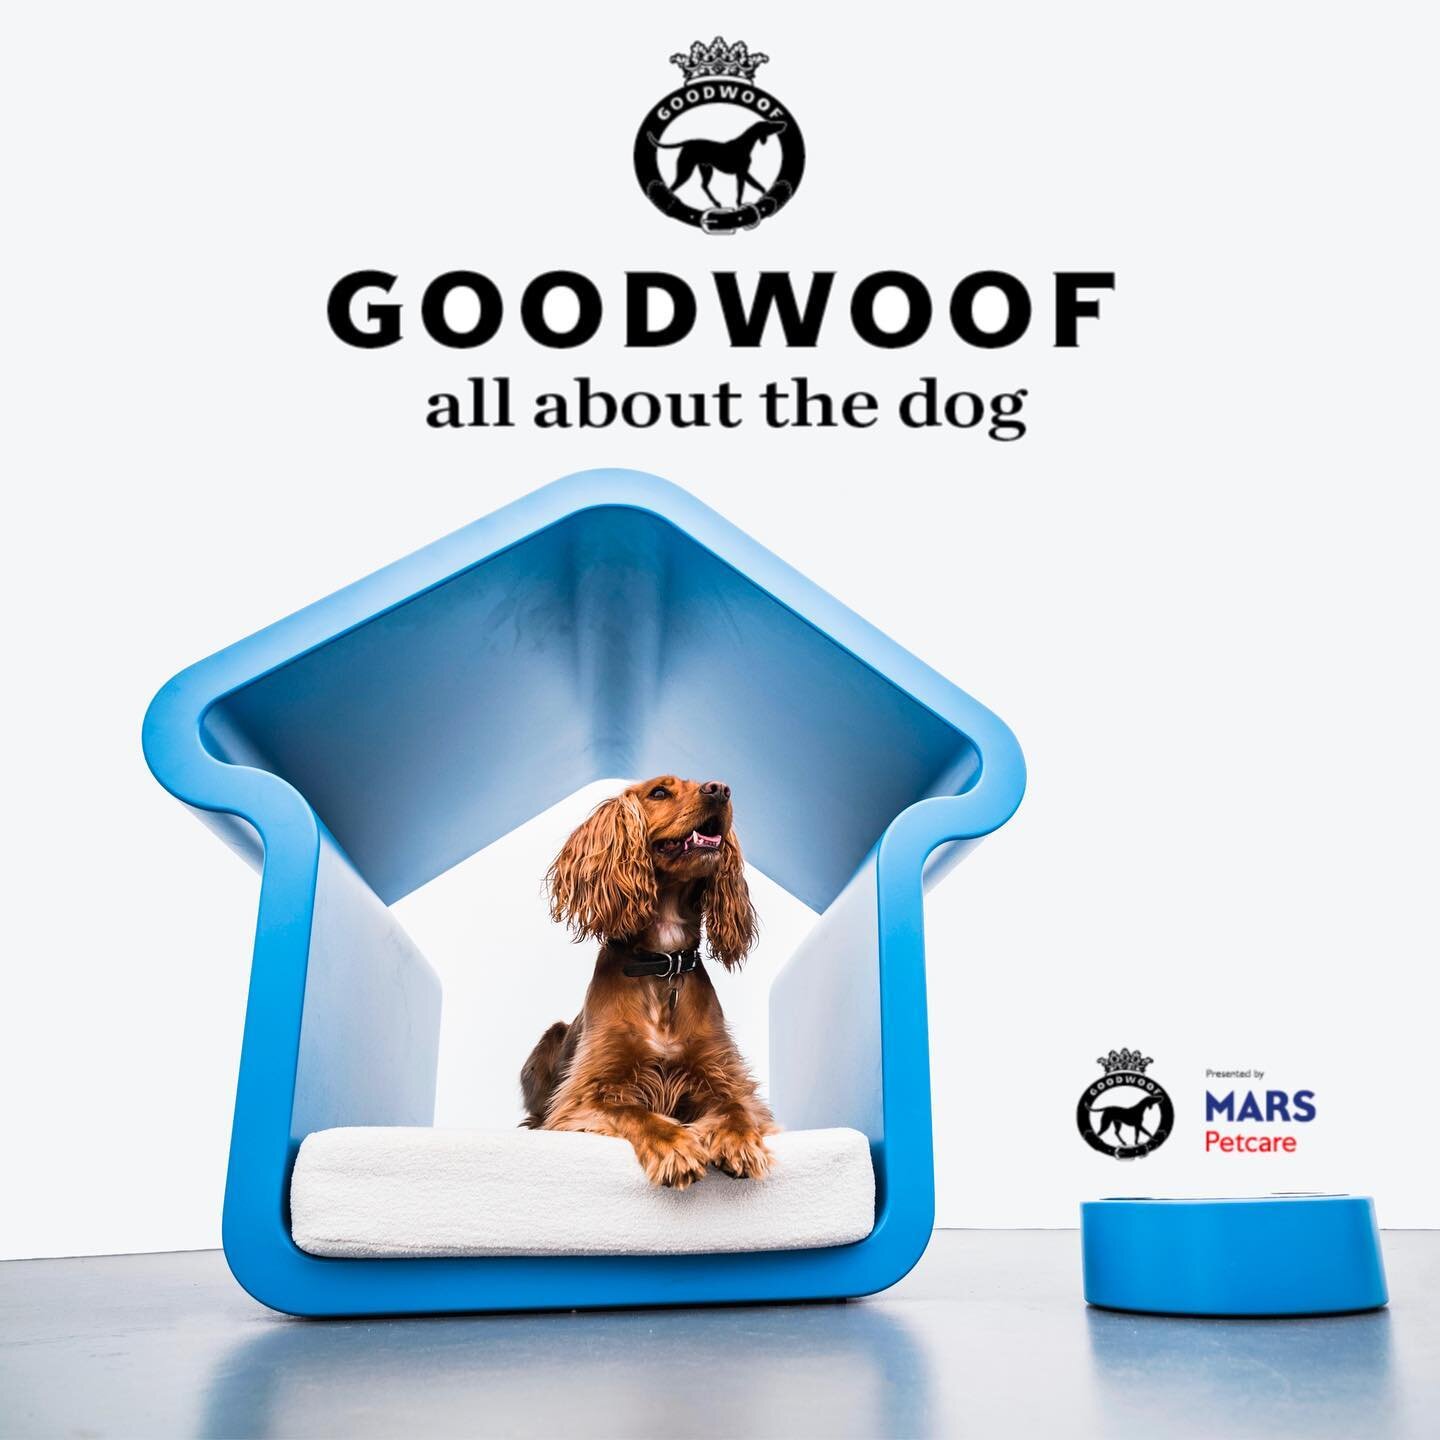 Get ready for a woof-tastic weekend at @goodwoofdogs ! 🐾 
Join us for tail-wagging fun as we unleash the best personalised products. Swing by BayCo Designs to pamper yourself and your furry friends with the finest goodies!

Find us outside the Agili